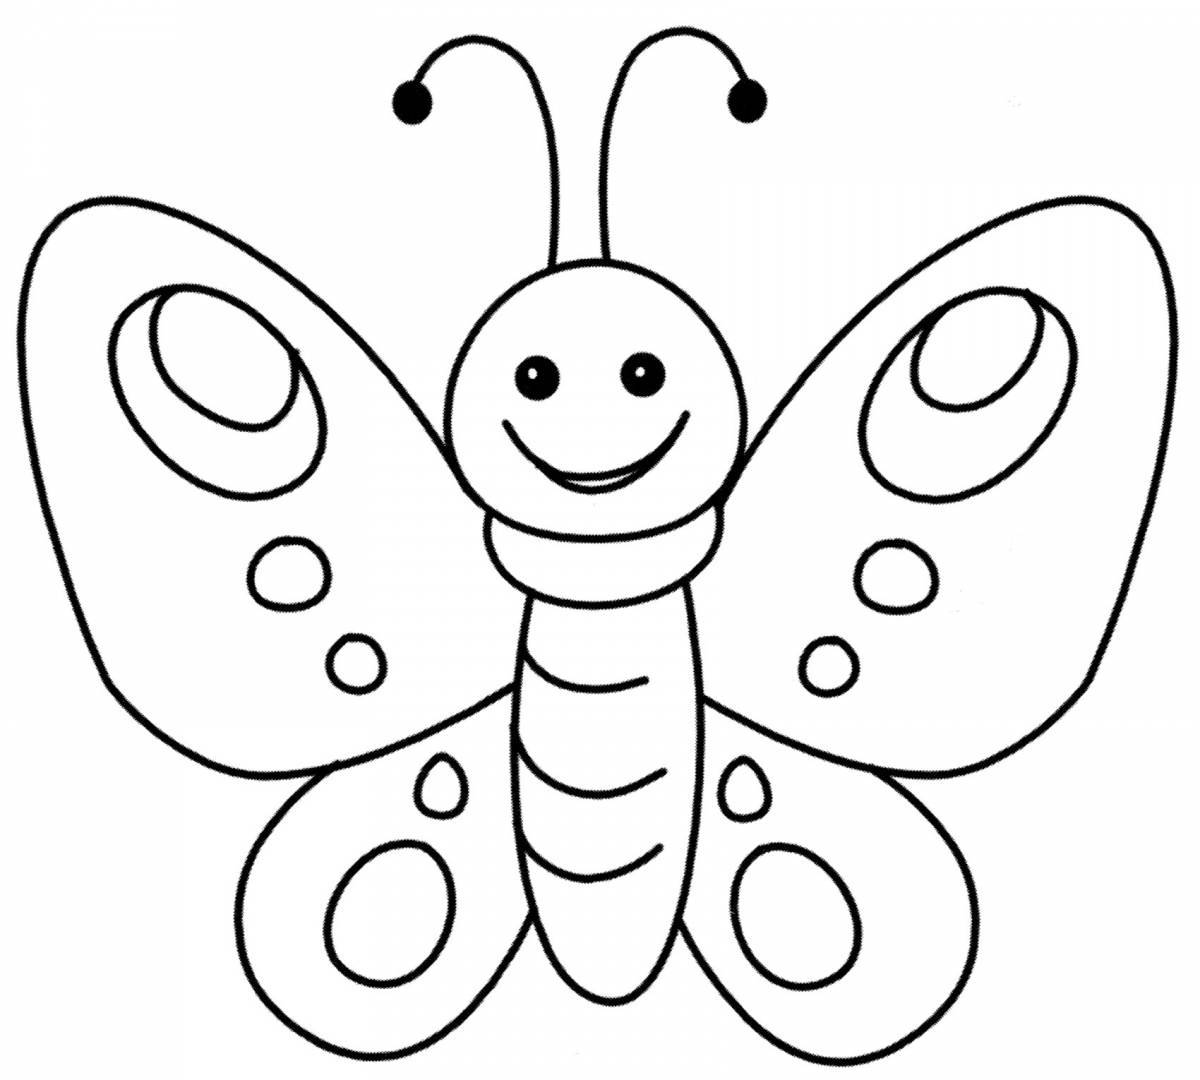 Violent butterfly coloring page